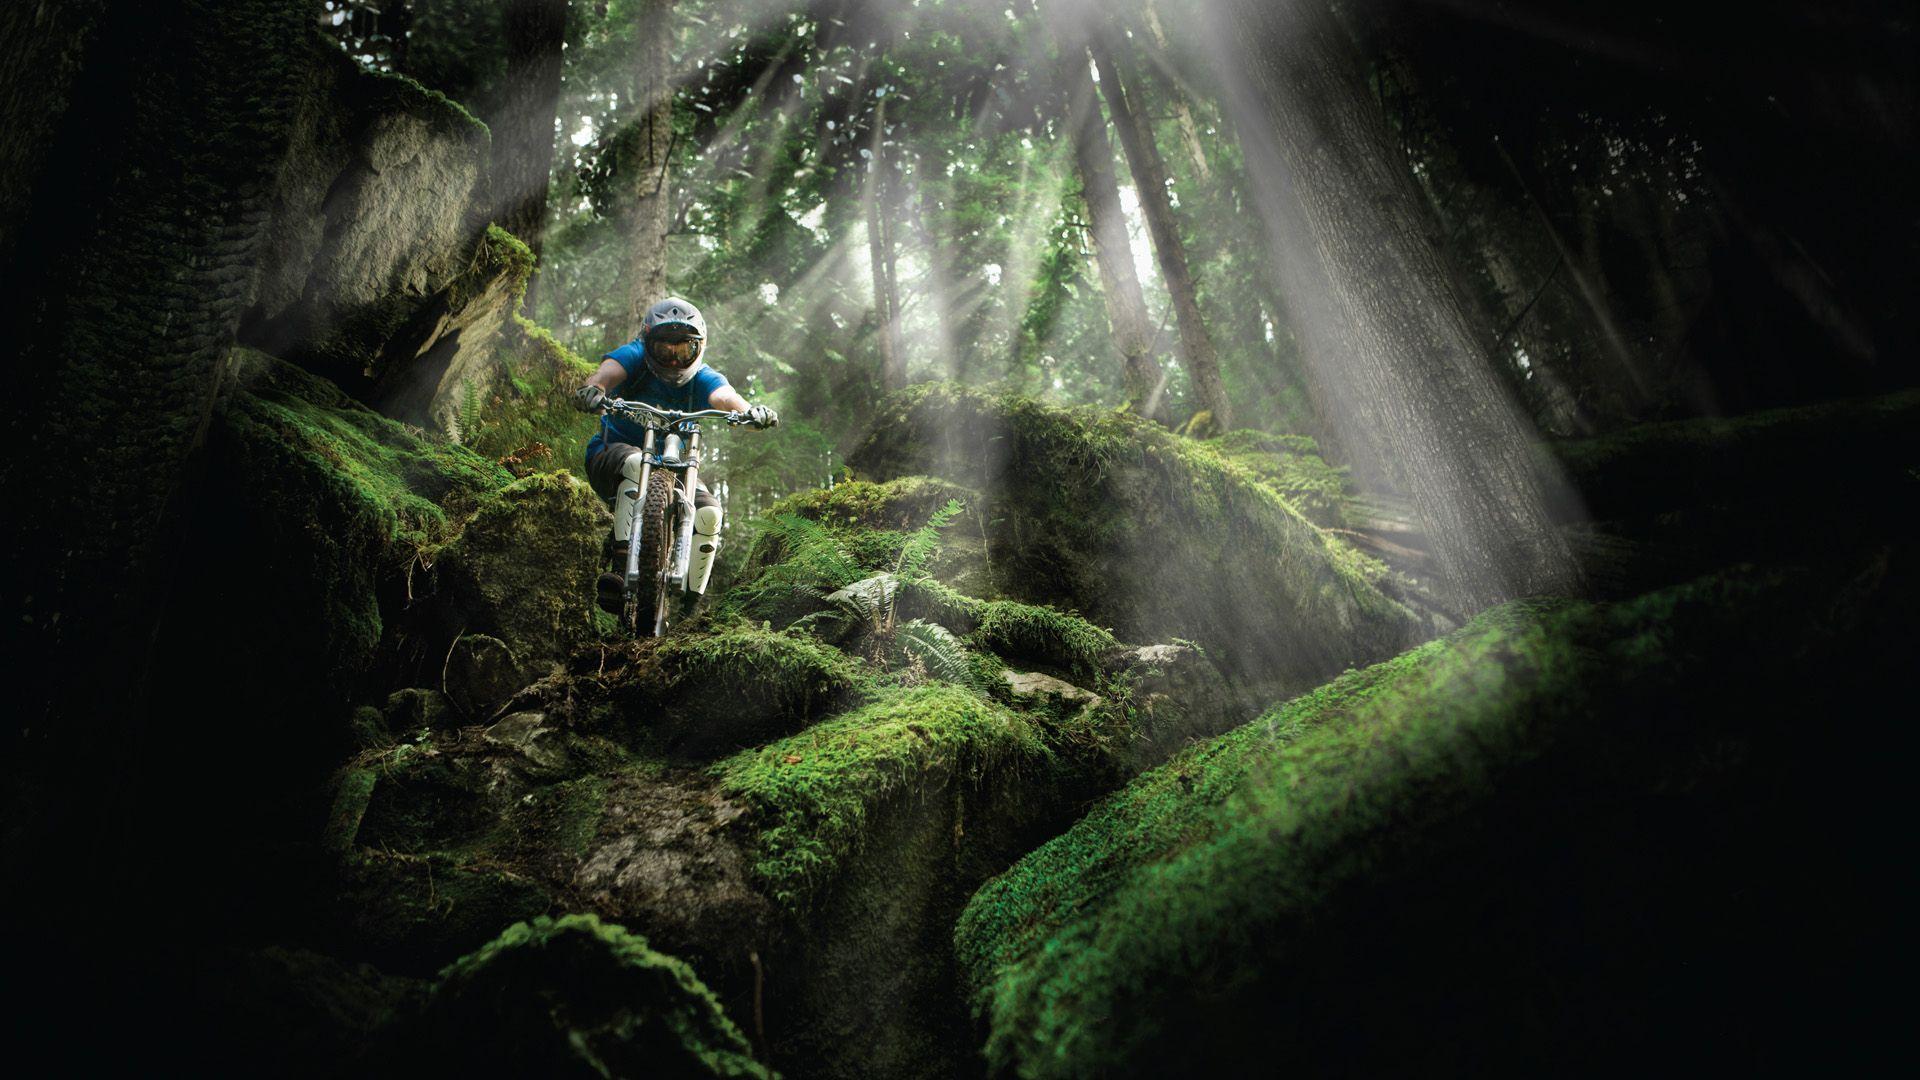 Downhill Mountainbike Wallpaper. Projects to Try